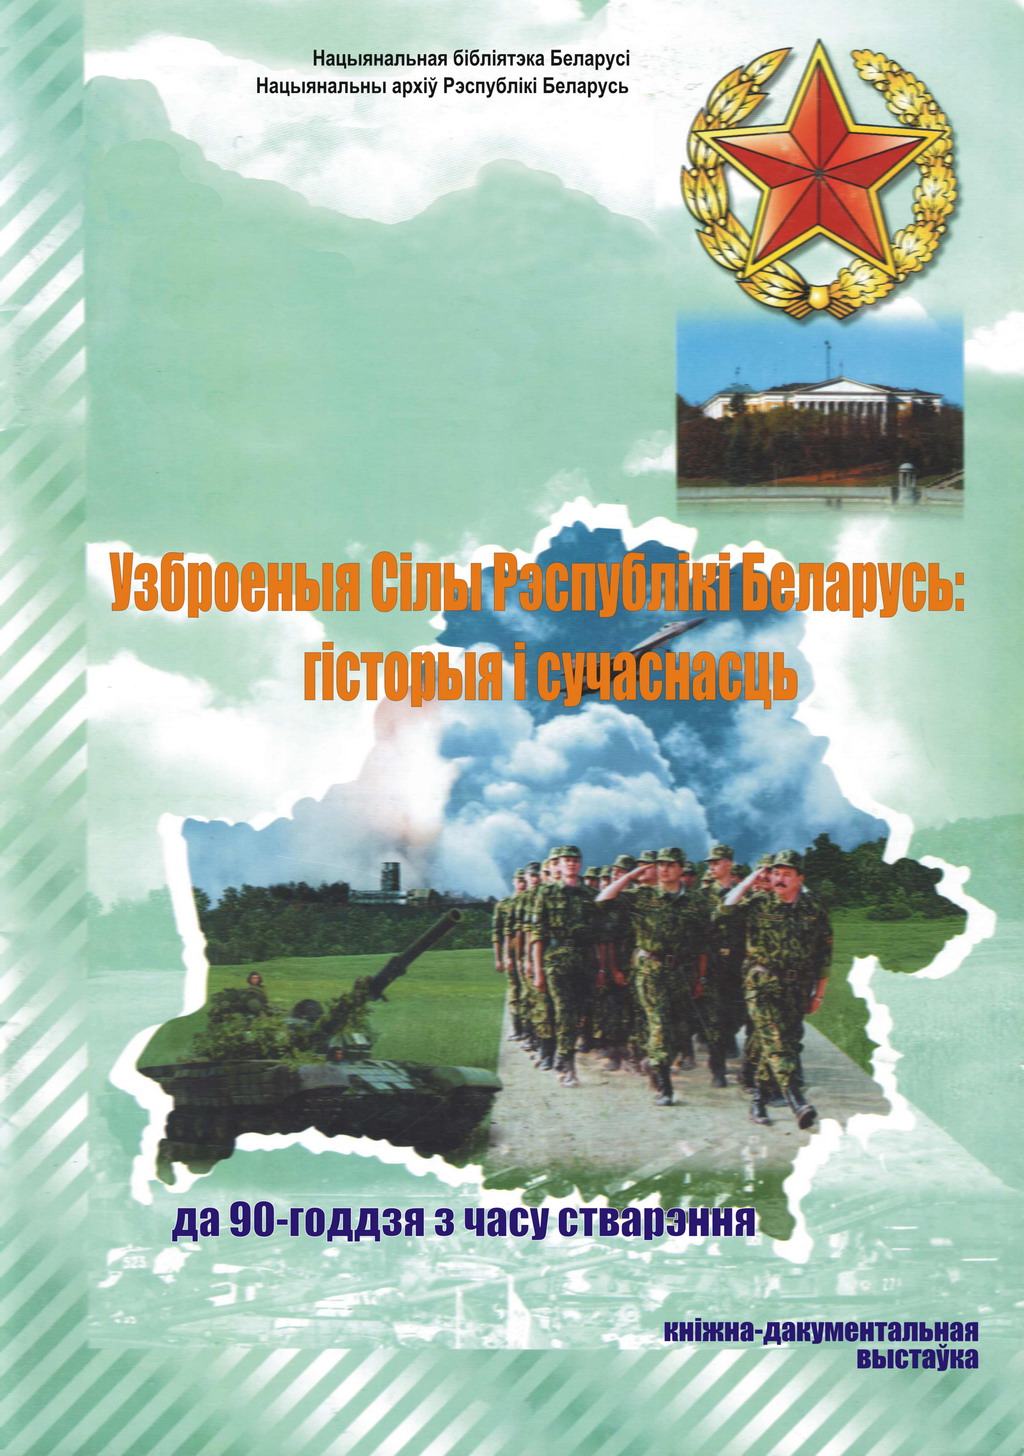 Armed Forces of the Republic of Belarus: the history and the present